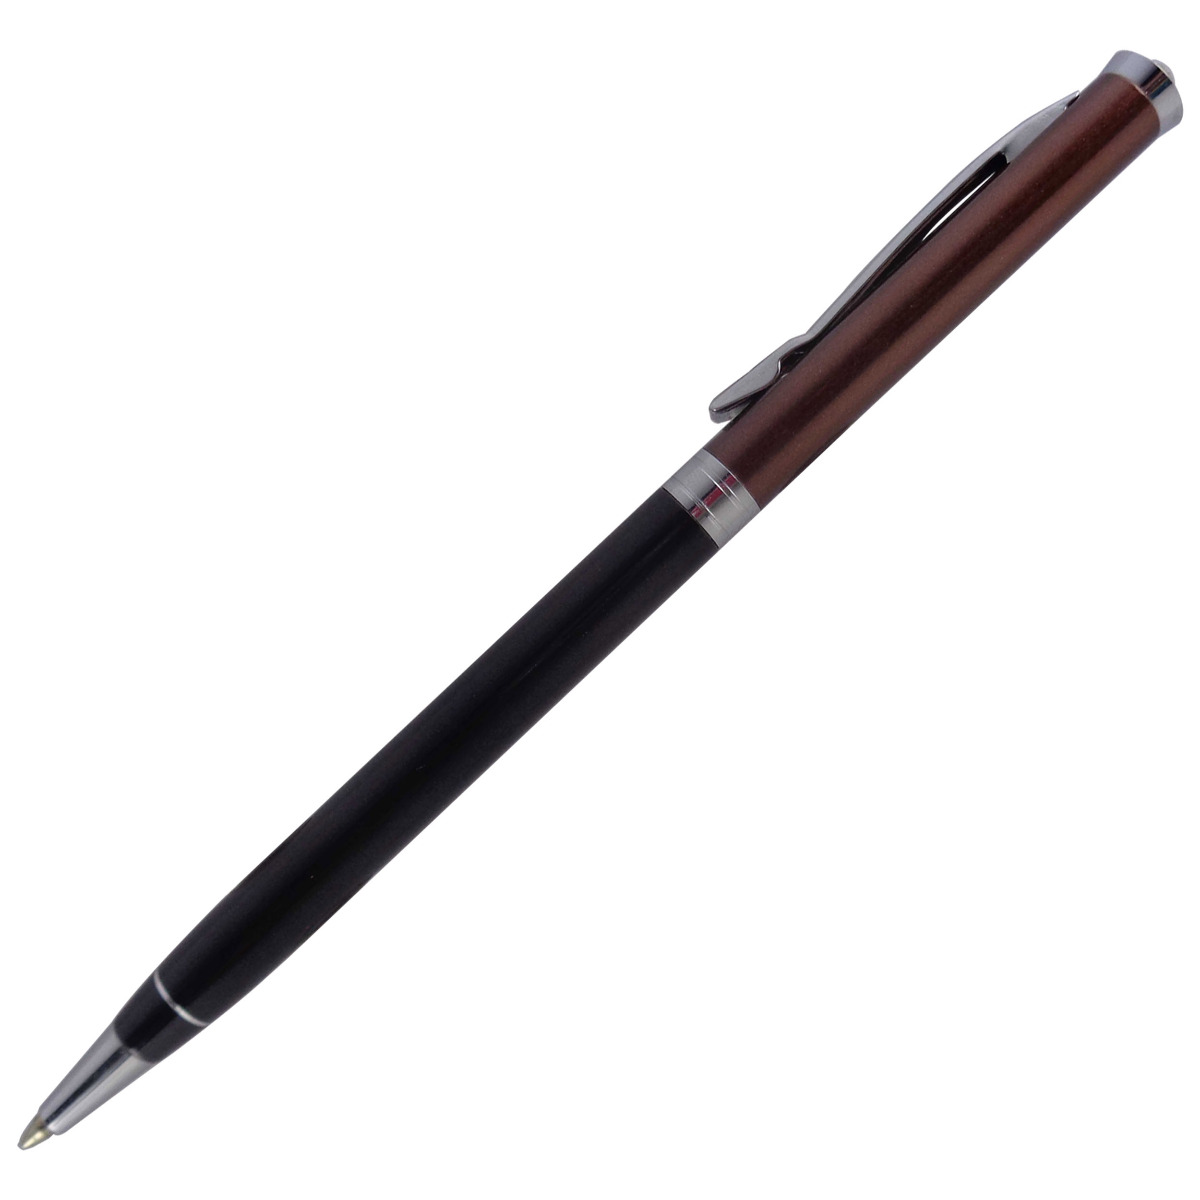 Pierre Cardin Beautiful – Black Color Body With Shiny Brown Color Twist Type Ball Pen Model: 13499